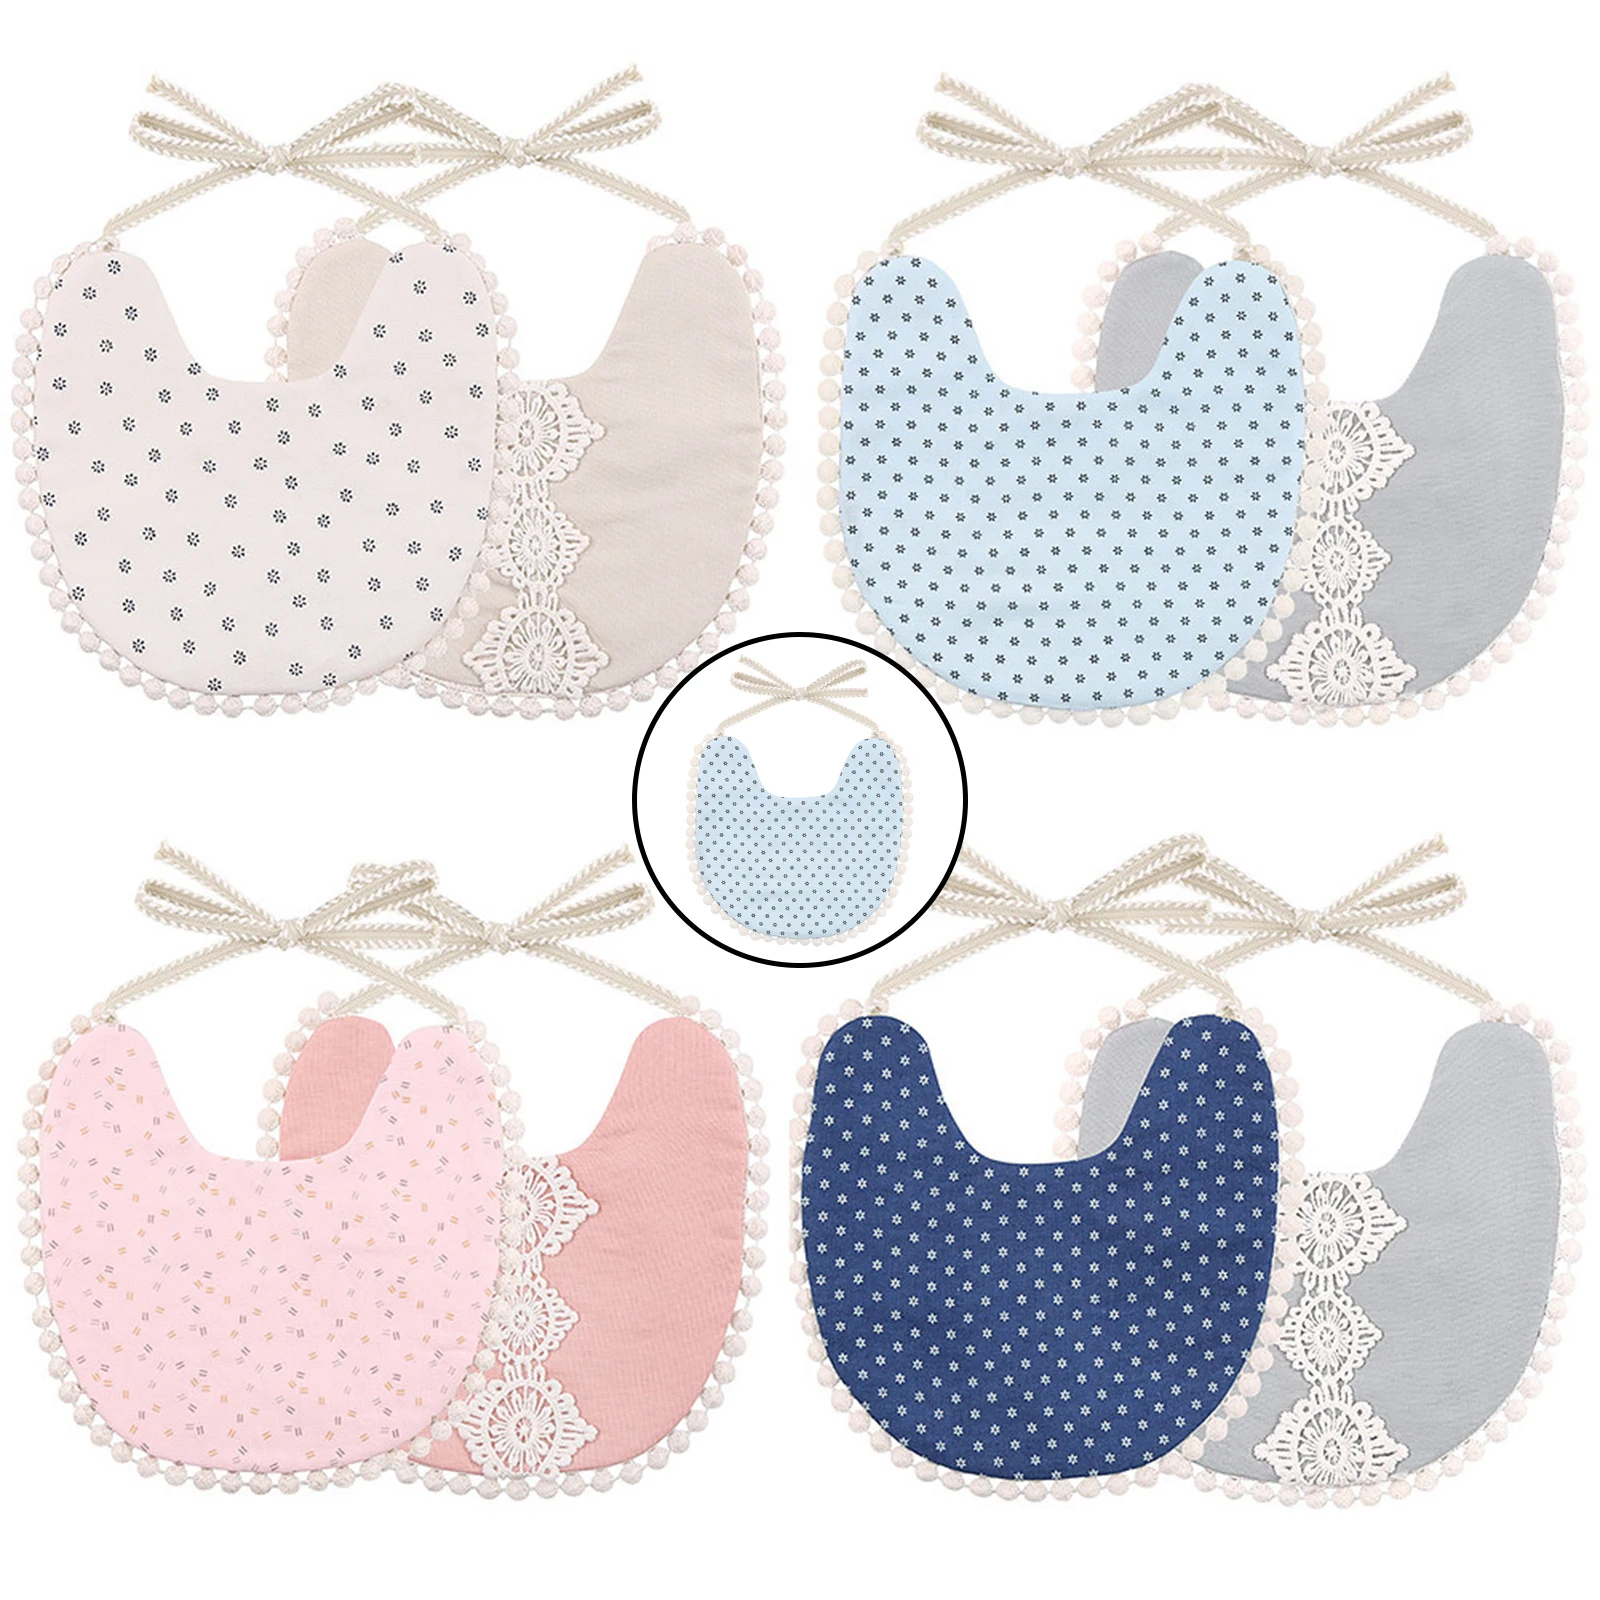 Adjustable Neckband Baby Feeding Bib Linen Cotton Eating Drinking Drooling Apron Protection for Toddler Newborn 0-4 Months